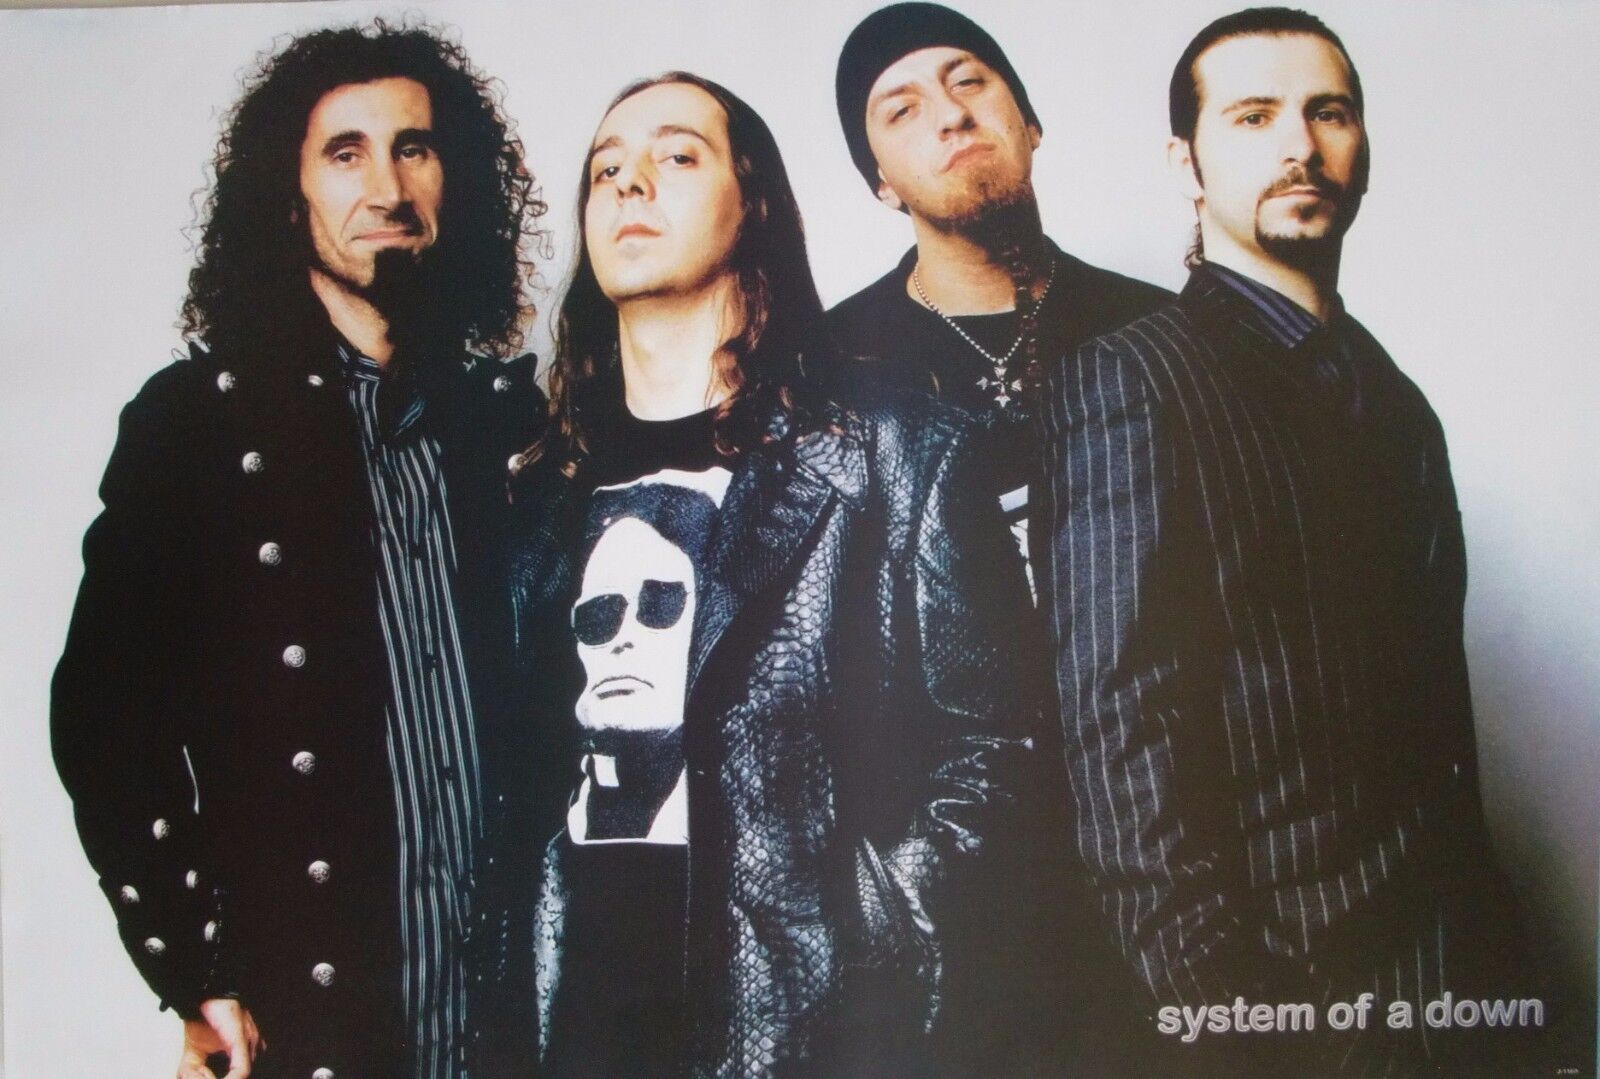 System Of A Down "band Standing Together In Black & White" Poster From Asia